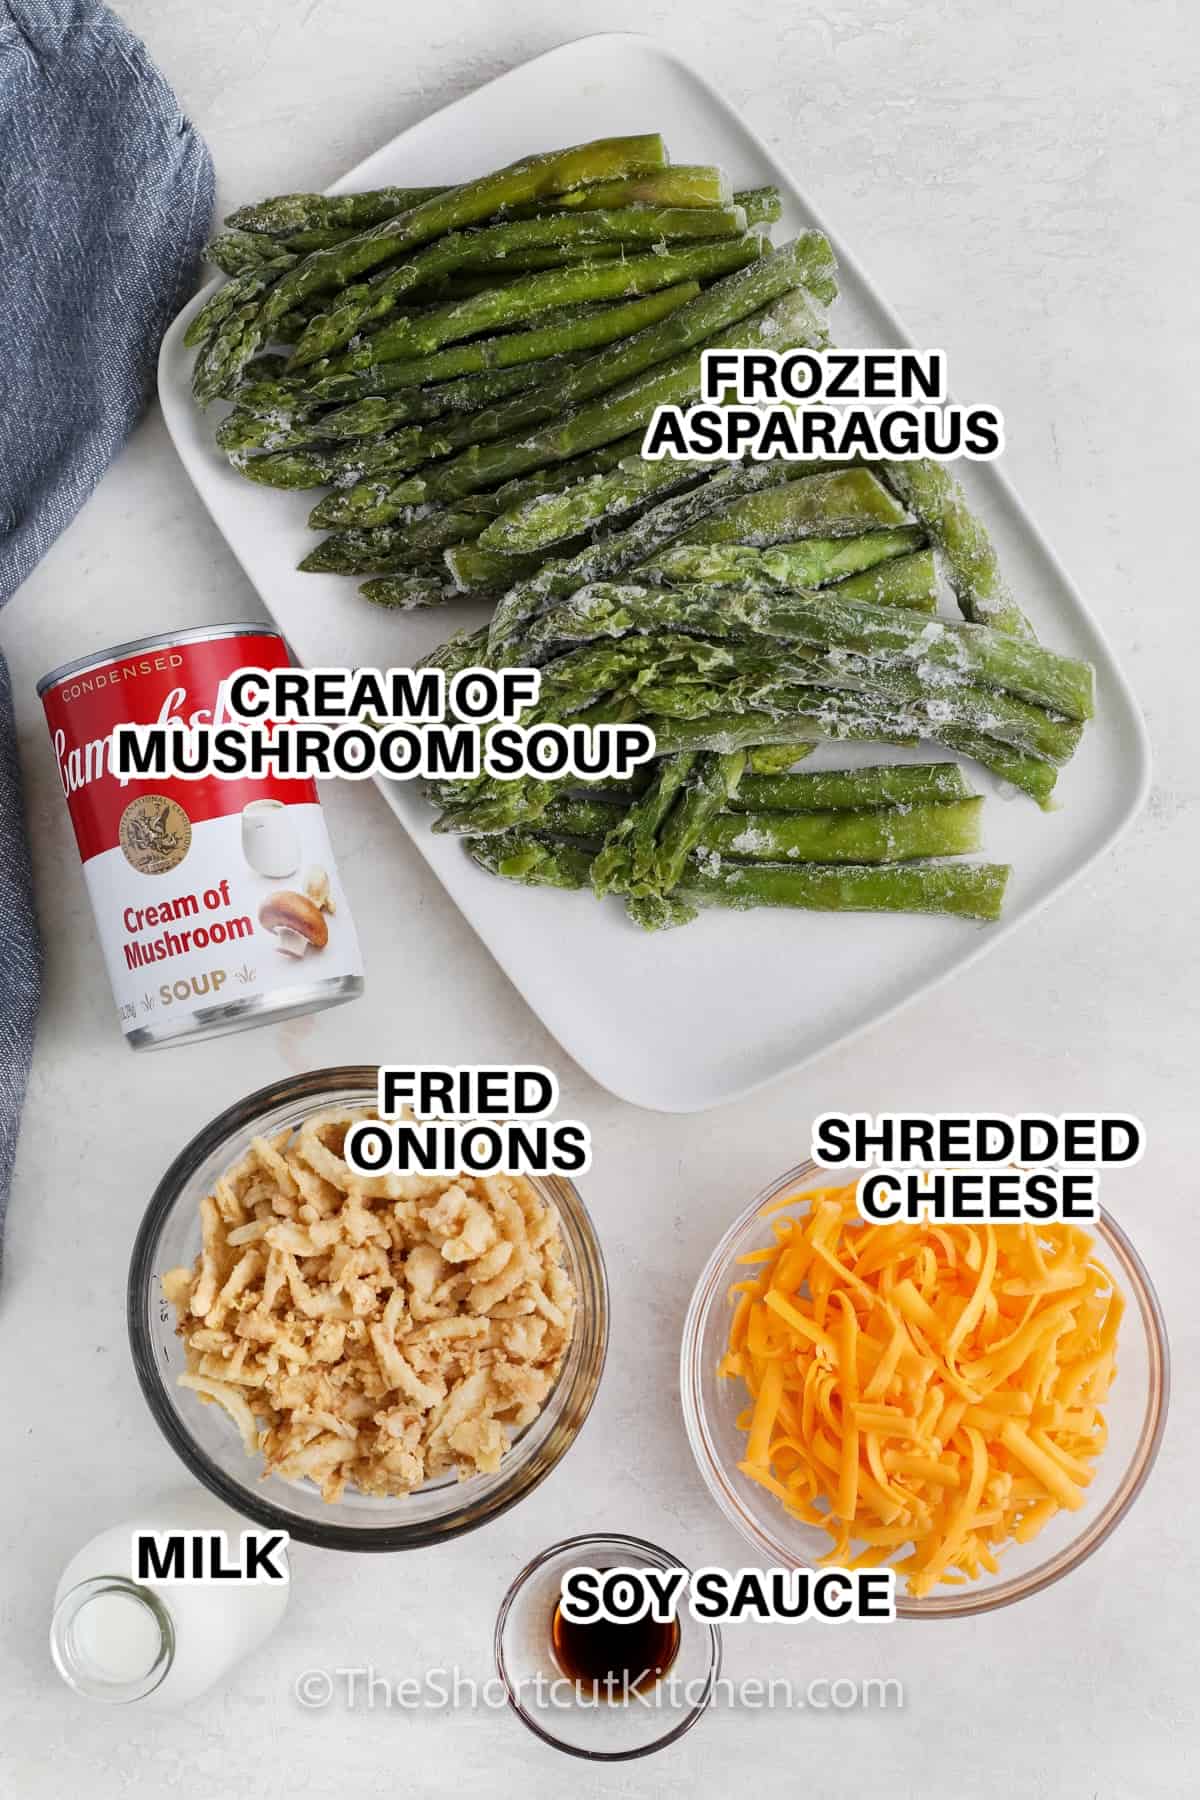 Ingredients to make Asparagus Casserole labeled: frozen asparagus, cream of mushroom soup, shredded cheese, fried onions, milk, and soy sauce